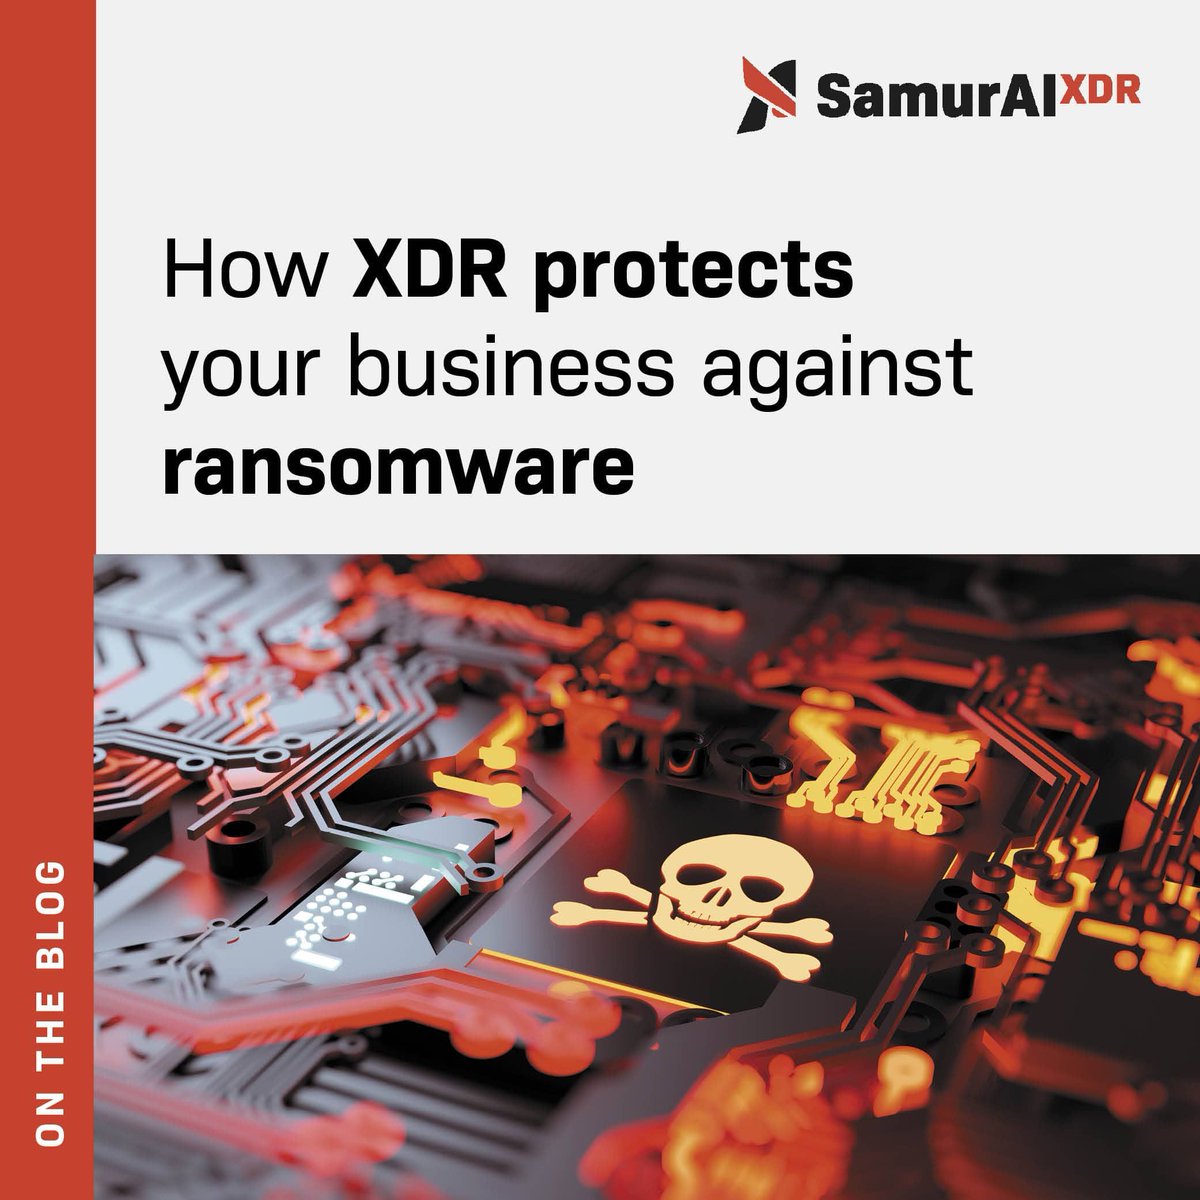 The steps of a ransomware attack and how to address them with Threat Intelligence and XDR. Full details here buff.ly/46obwdS 

#ransomware #threatintelligence #smb #securityanalyst #cybersecurity